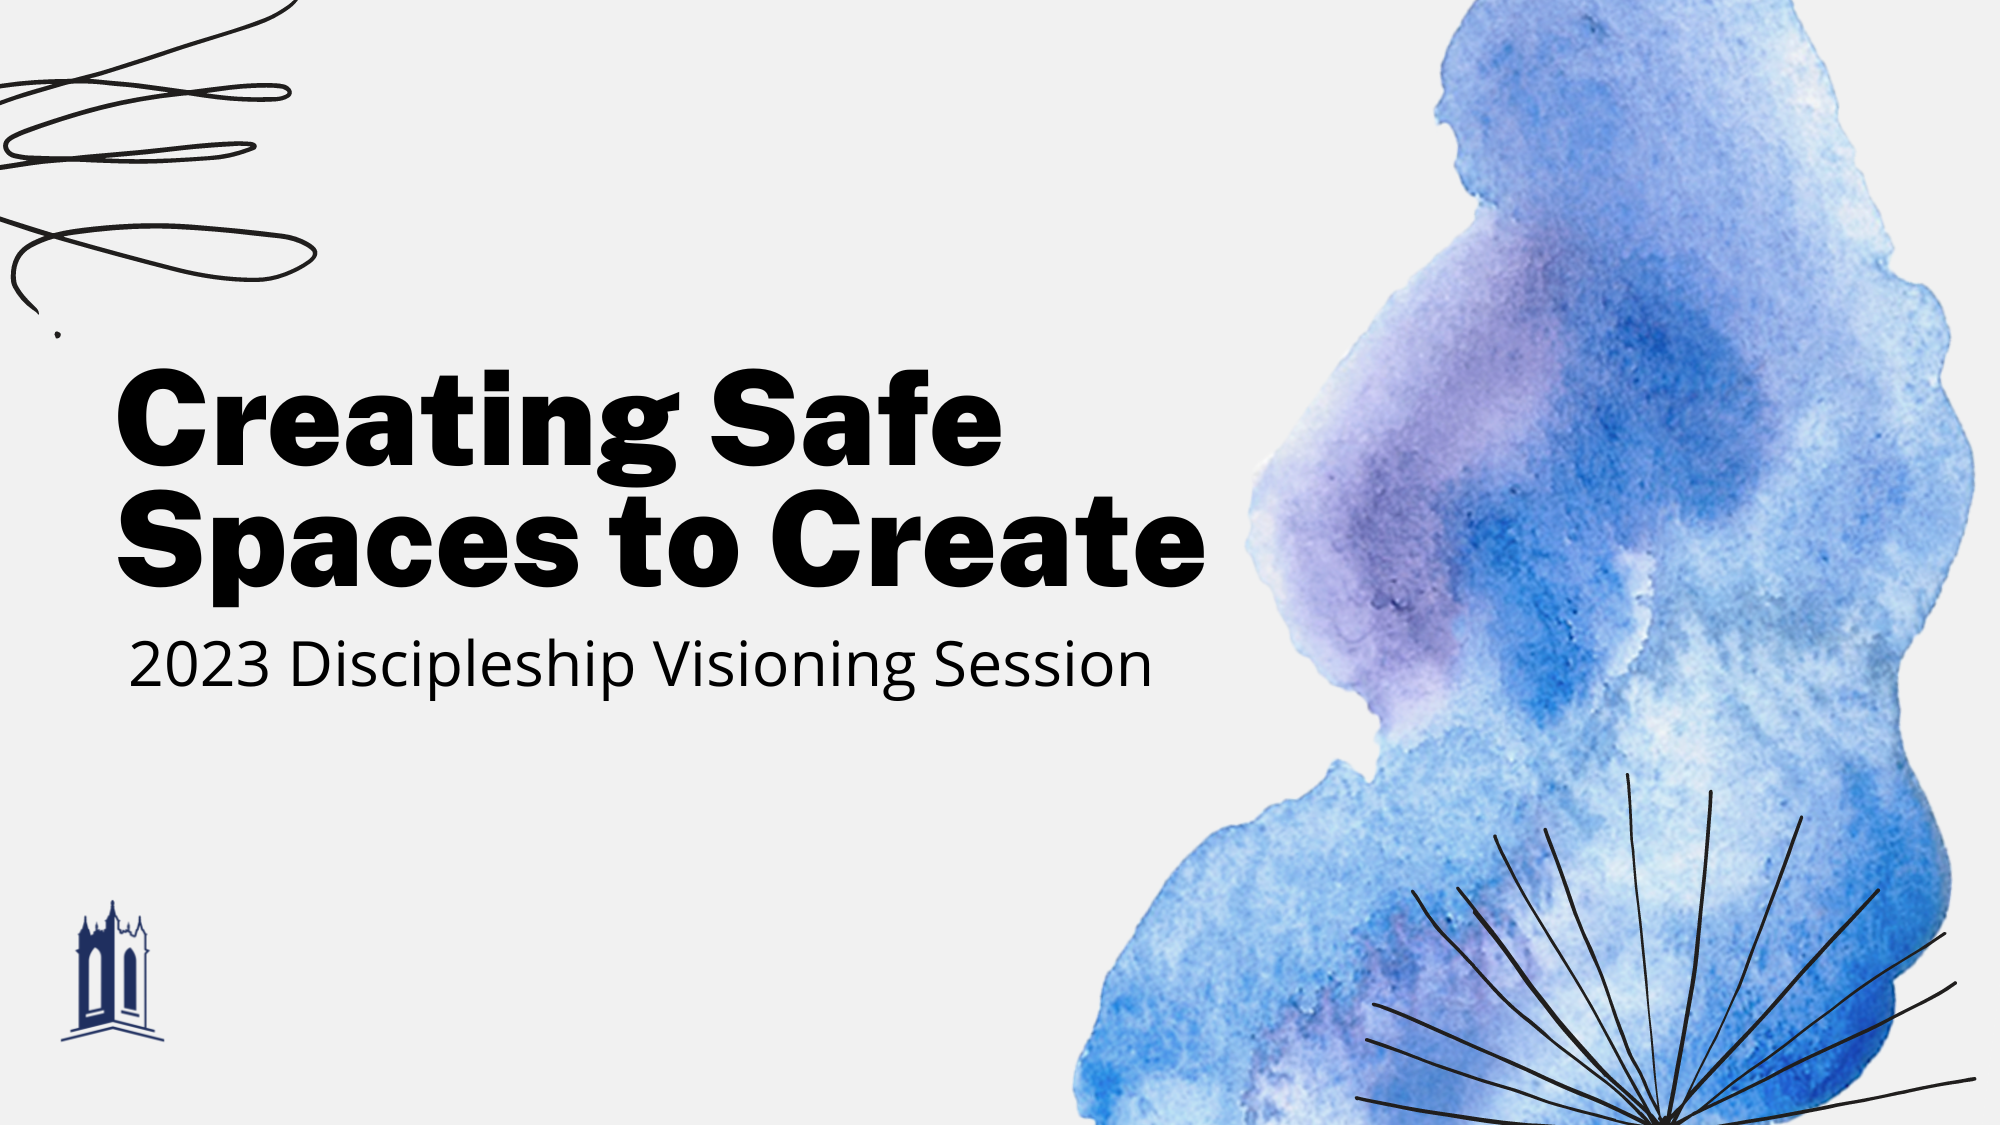 Creating Safe Spaces to Create: 2023 Discipleship Visioning Session